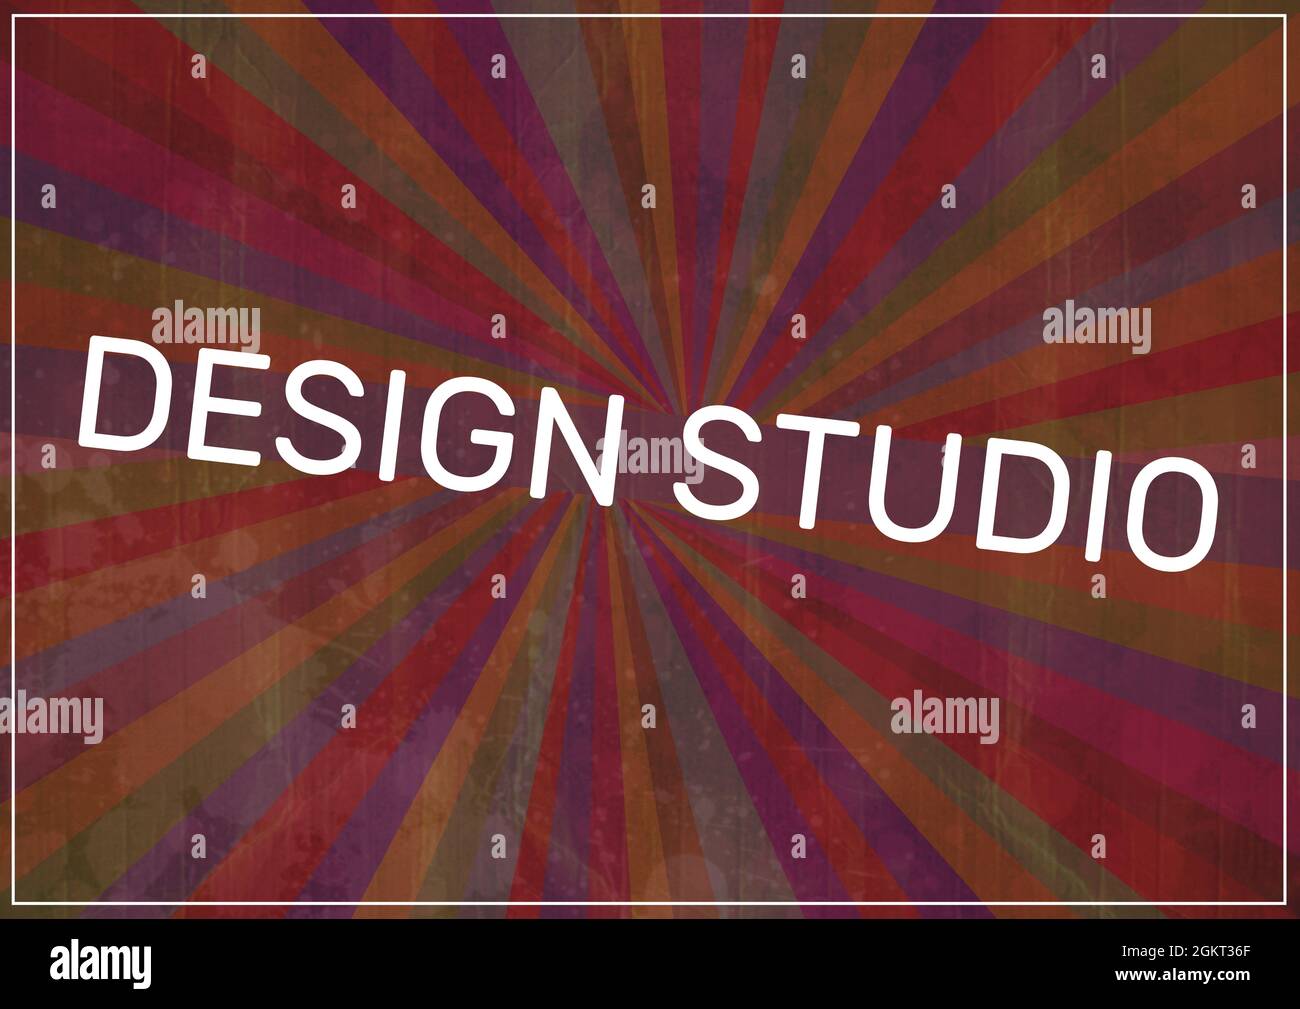 Digitally generated image of design studio text over colorful radial background Stock Photo